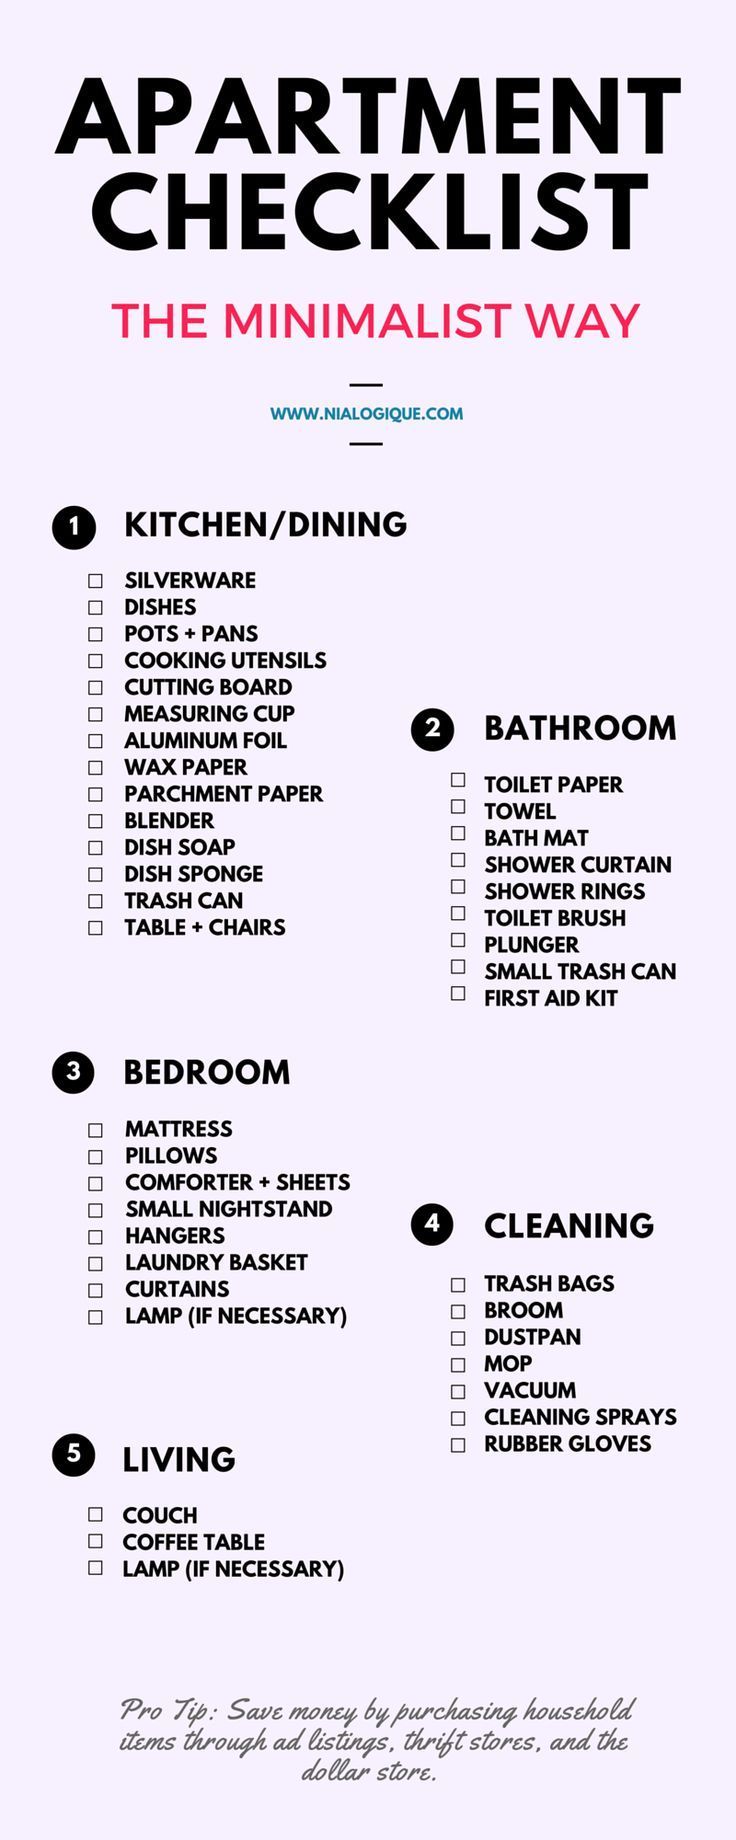 Minimalist Apartment Checklist | Check out this awesome, minimal infographic focusing on all of the essentials for your next